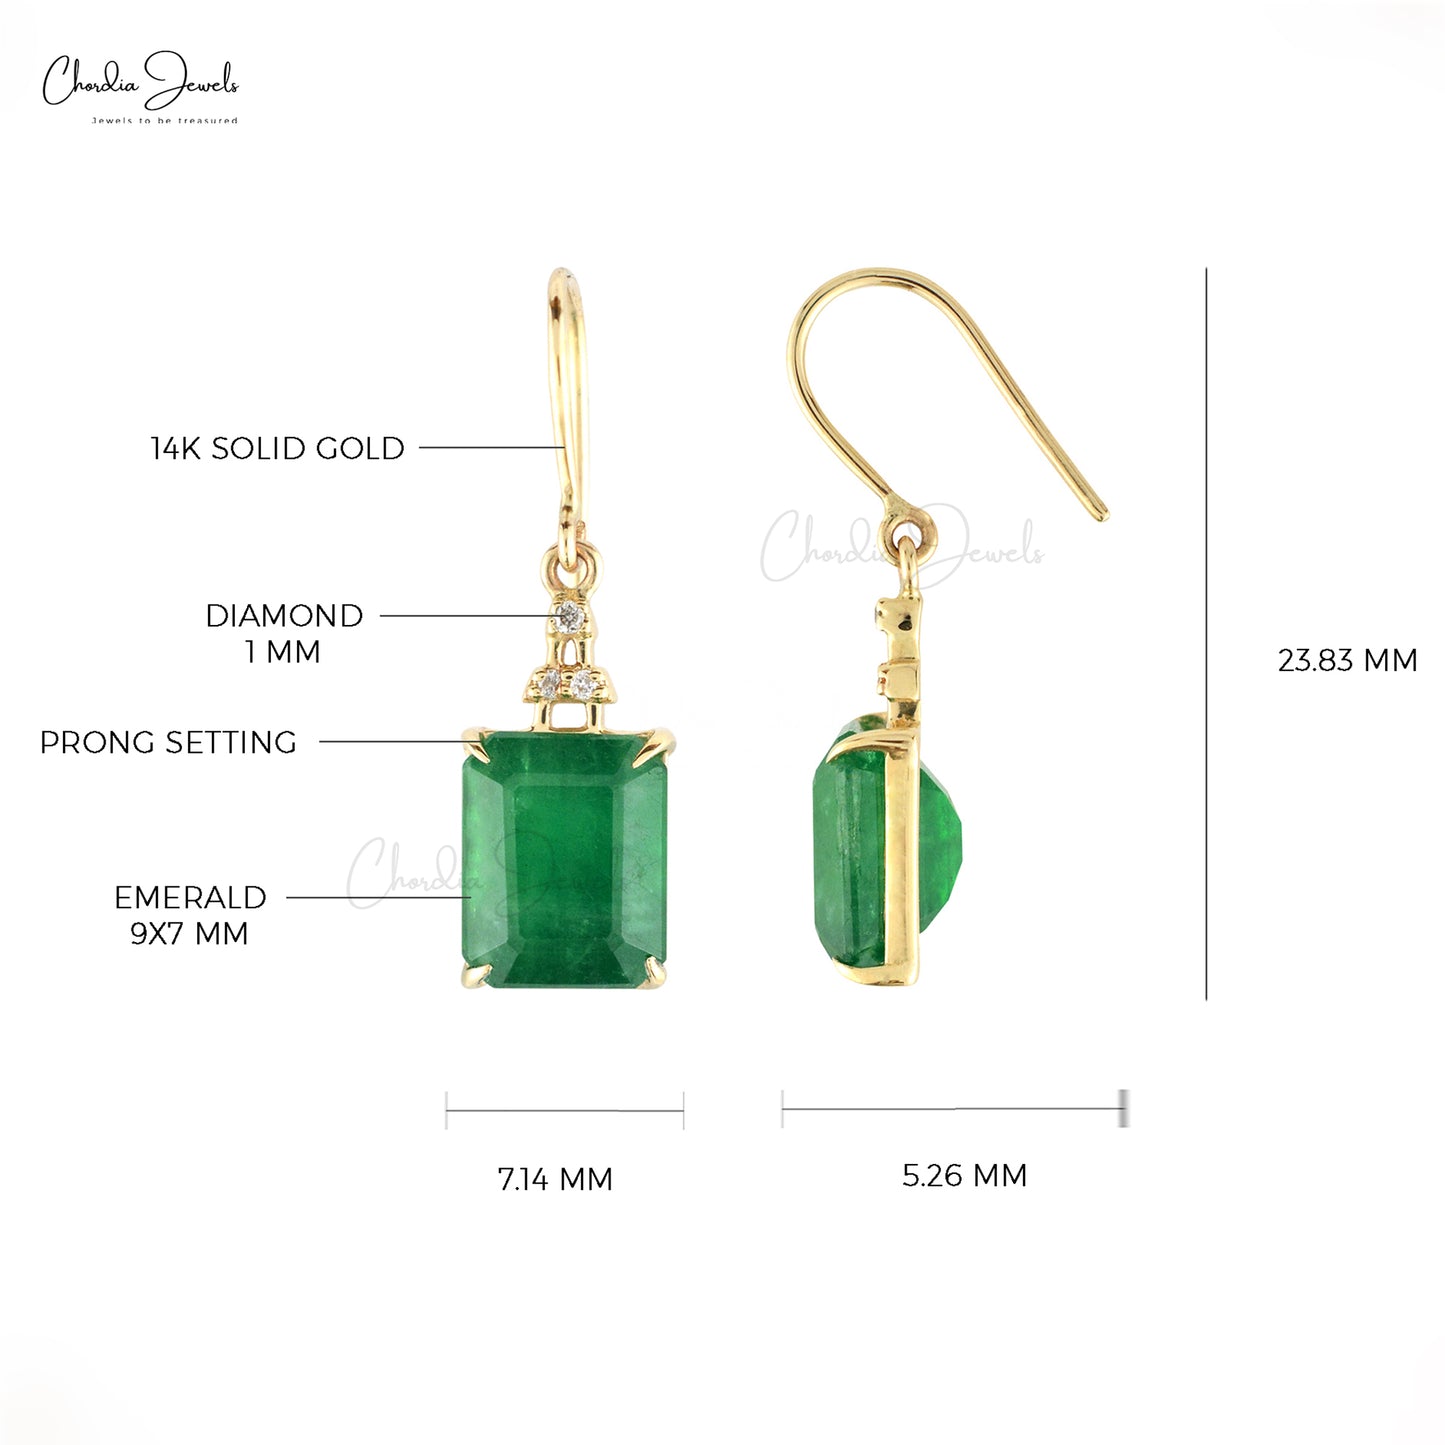 Make a lasting impression with these real emerald earrings.